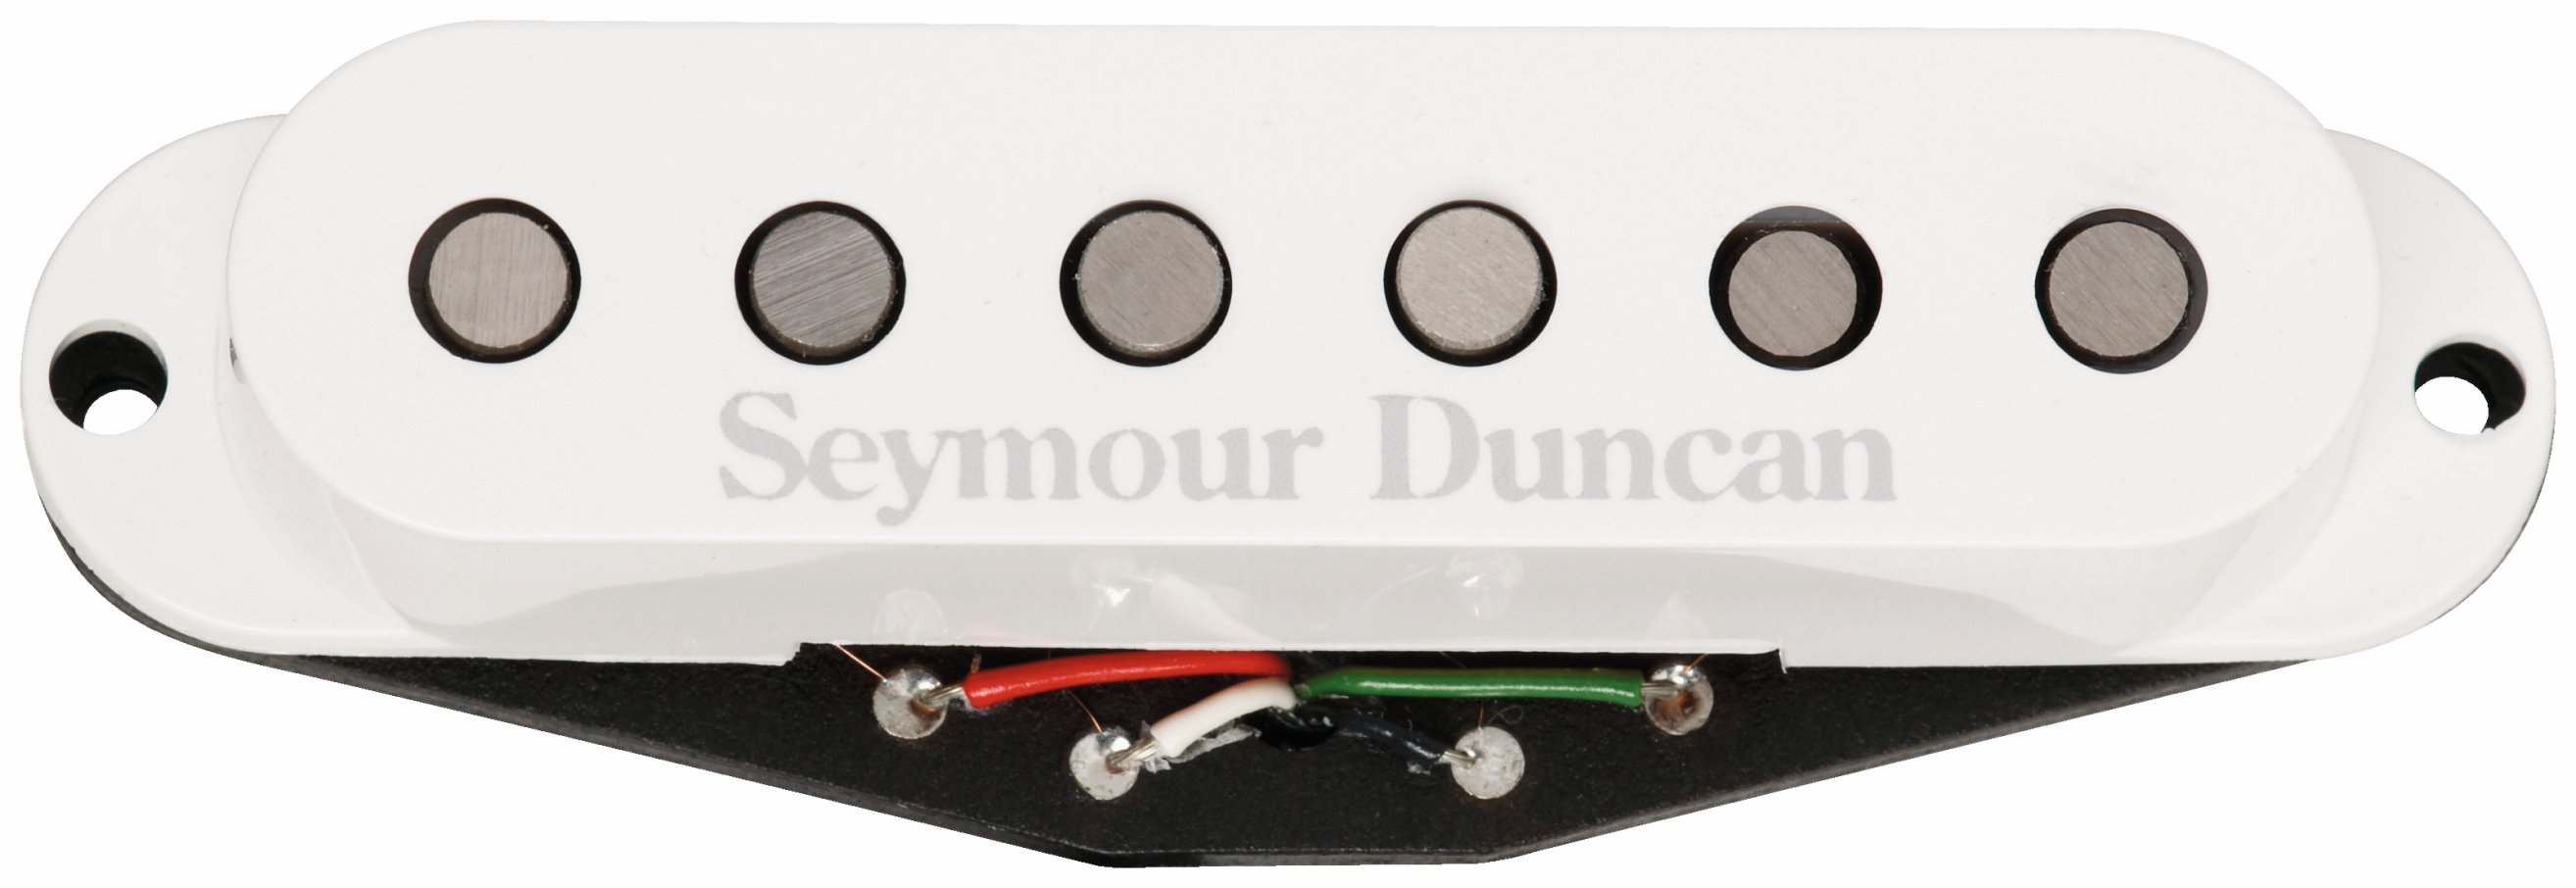 Seymour Duncan STK-S1N - Classic Strat Stack - Neck/Middle Pickup - White